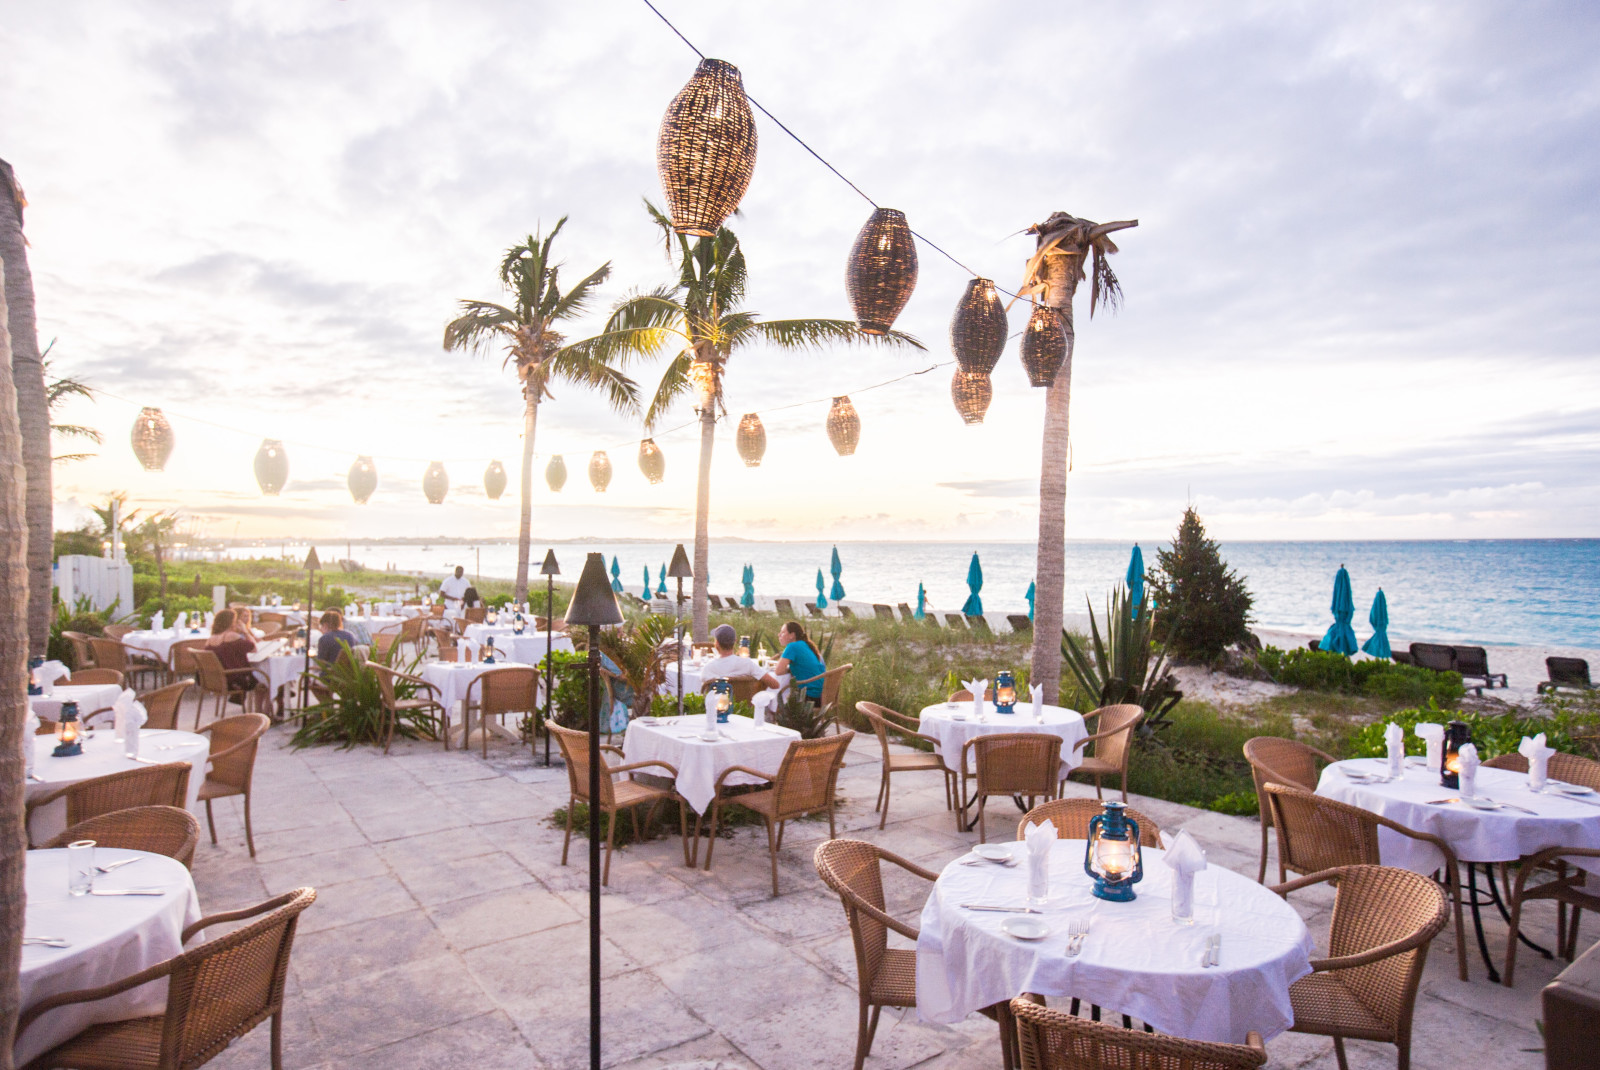 Tables with white tablecloths and hanging lights with cloudy skies during daytime